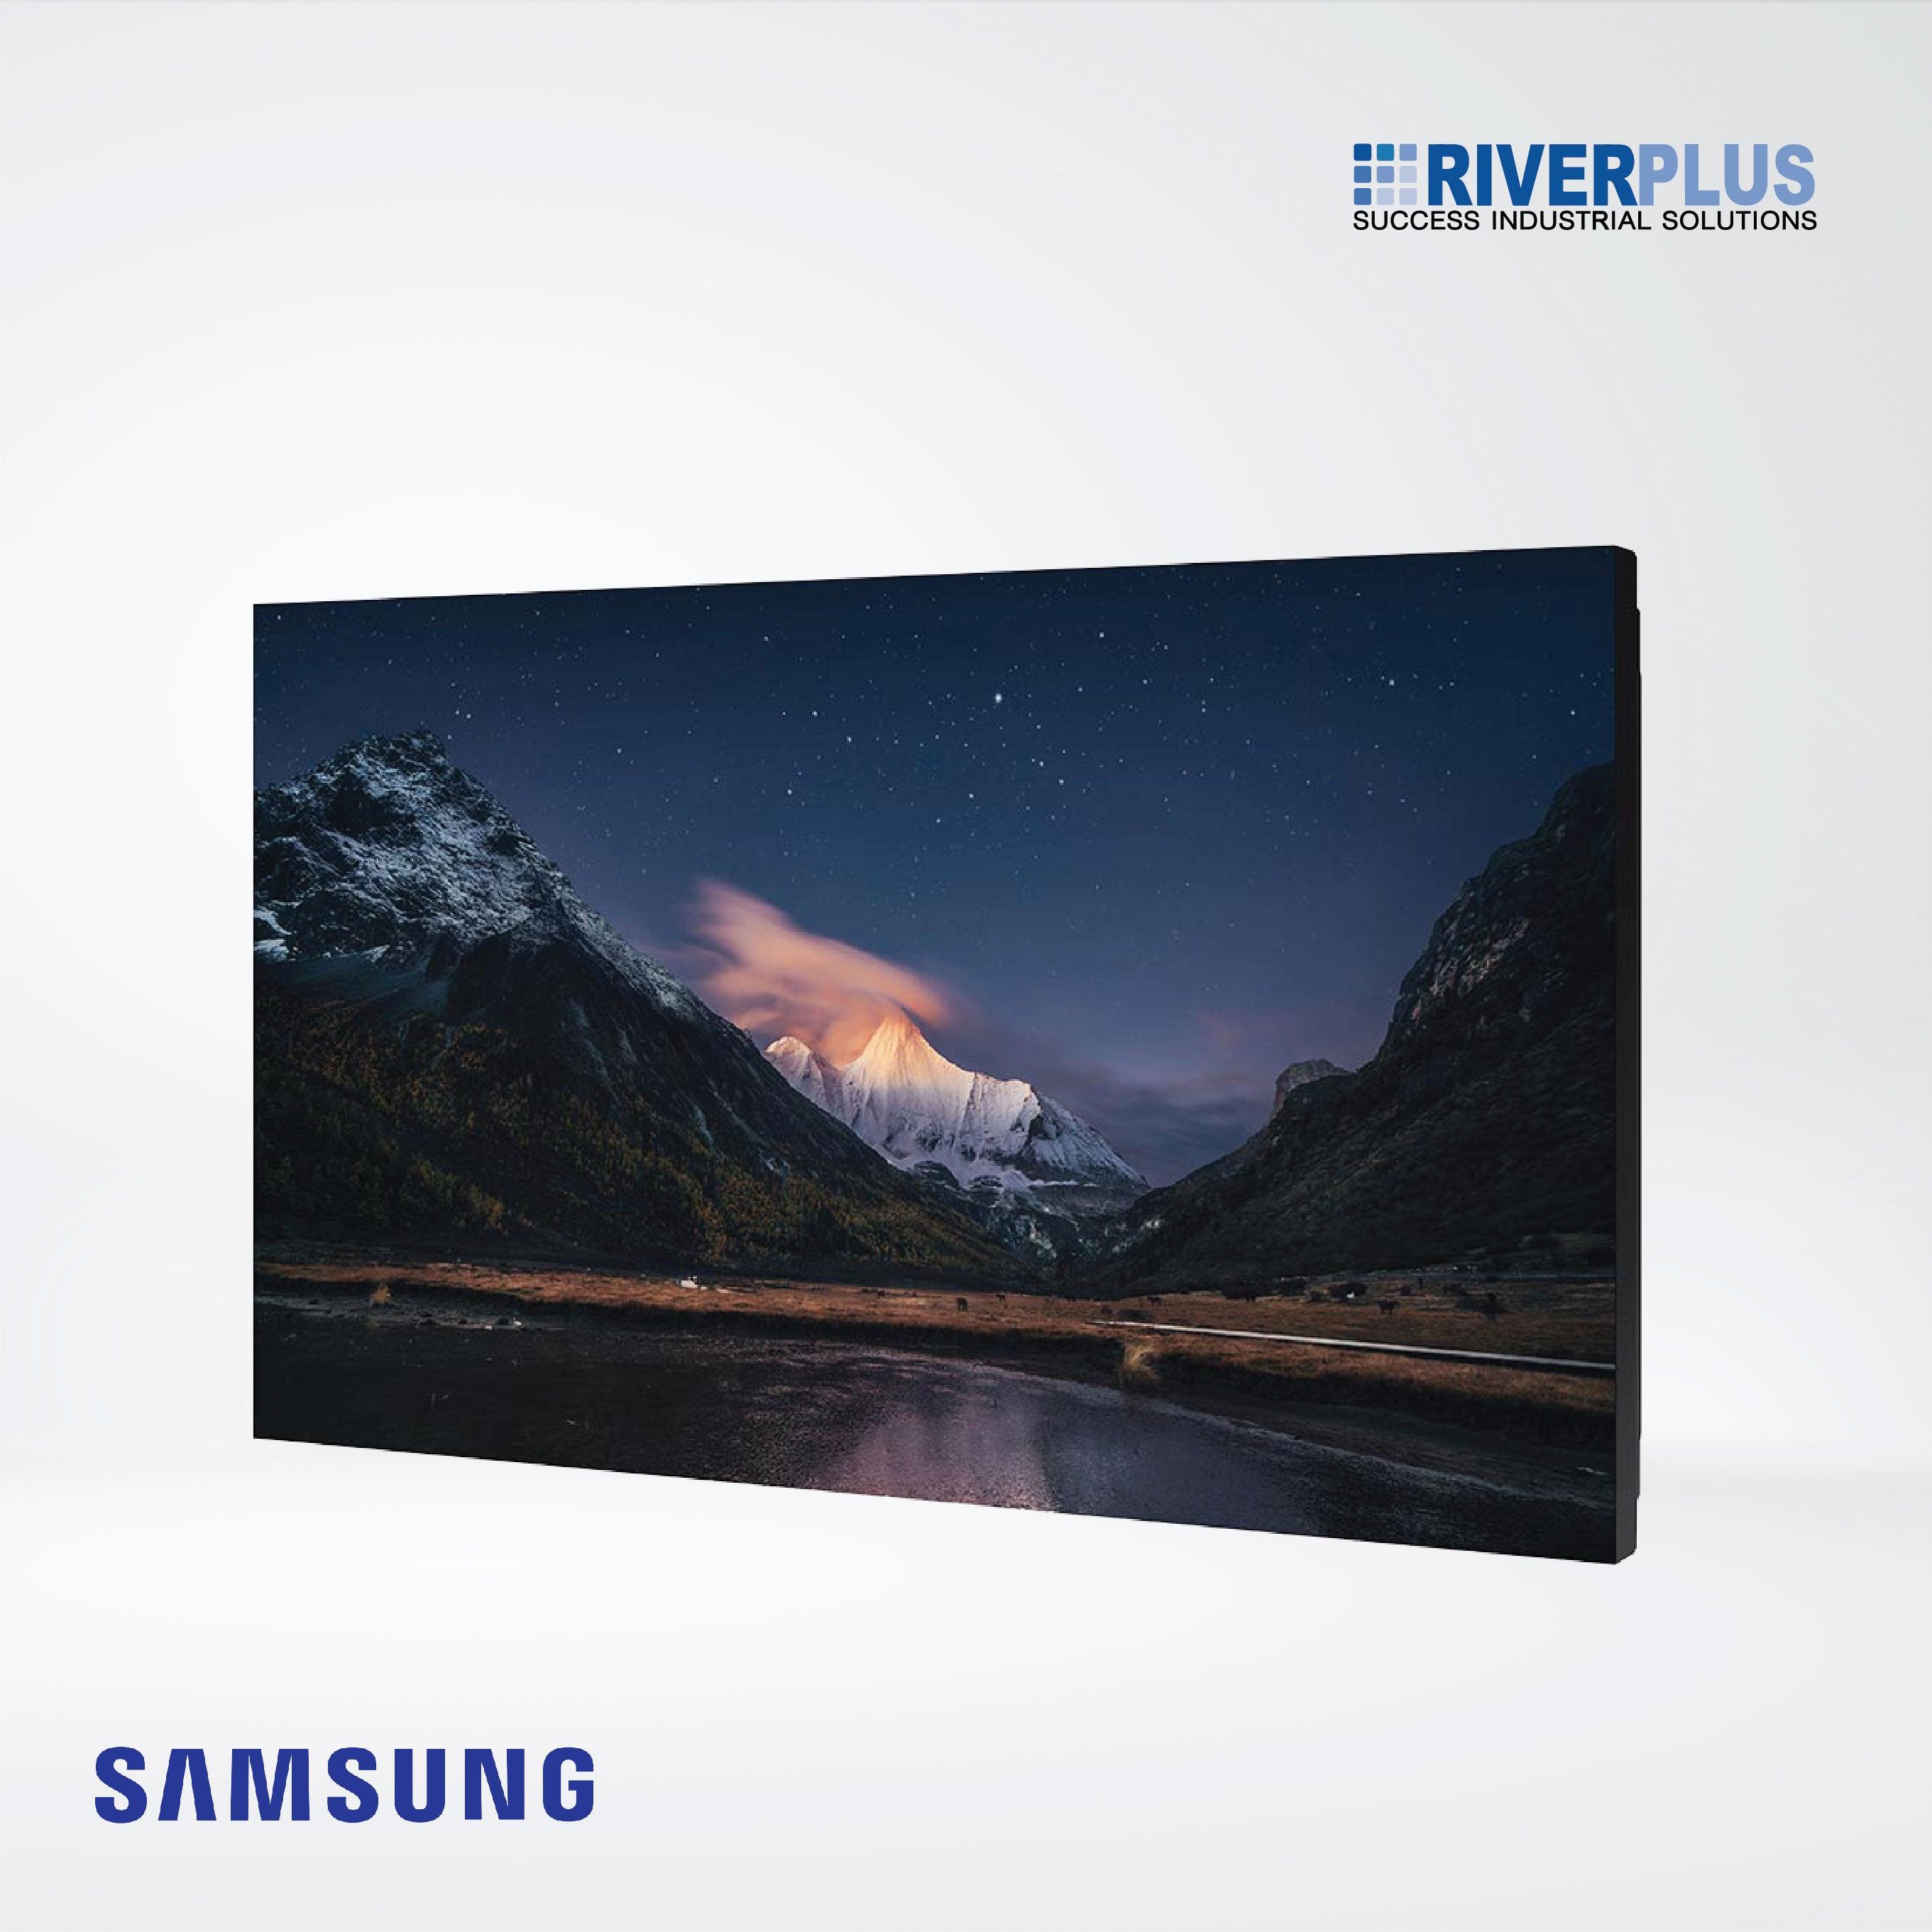 VM55B-R 55" 500 nit Always-on, space-saving solution delivering a seamless visual experience - Riverplus